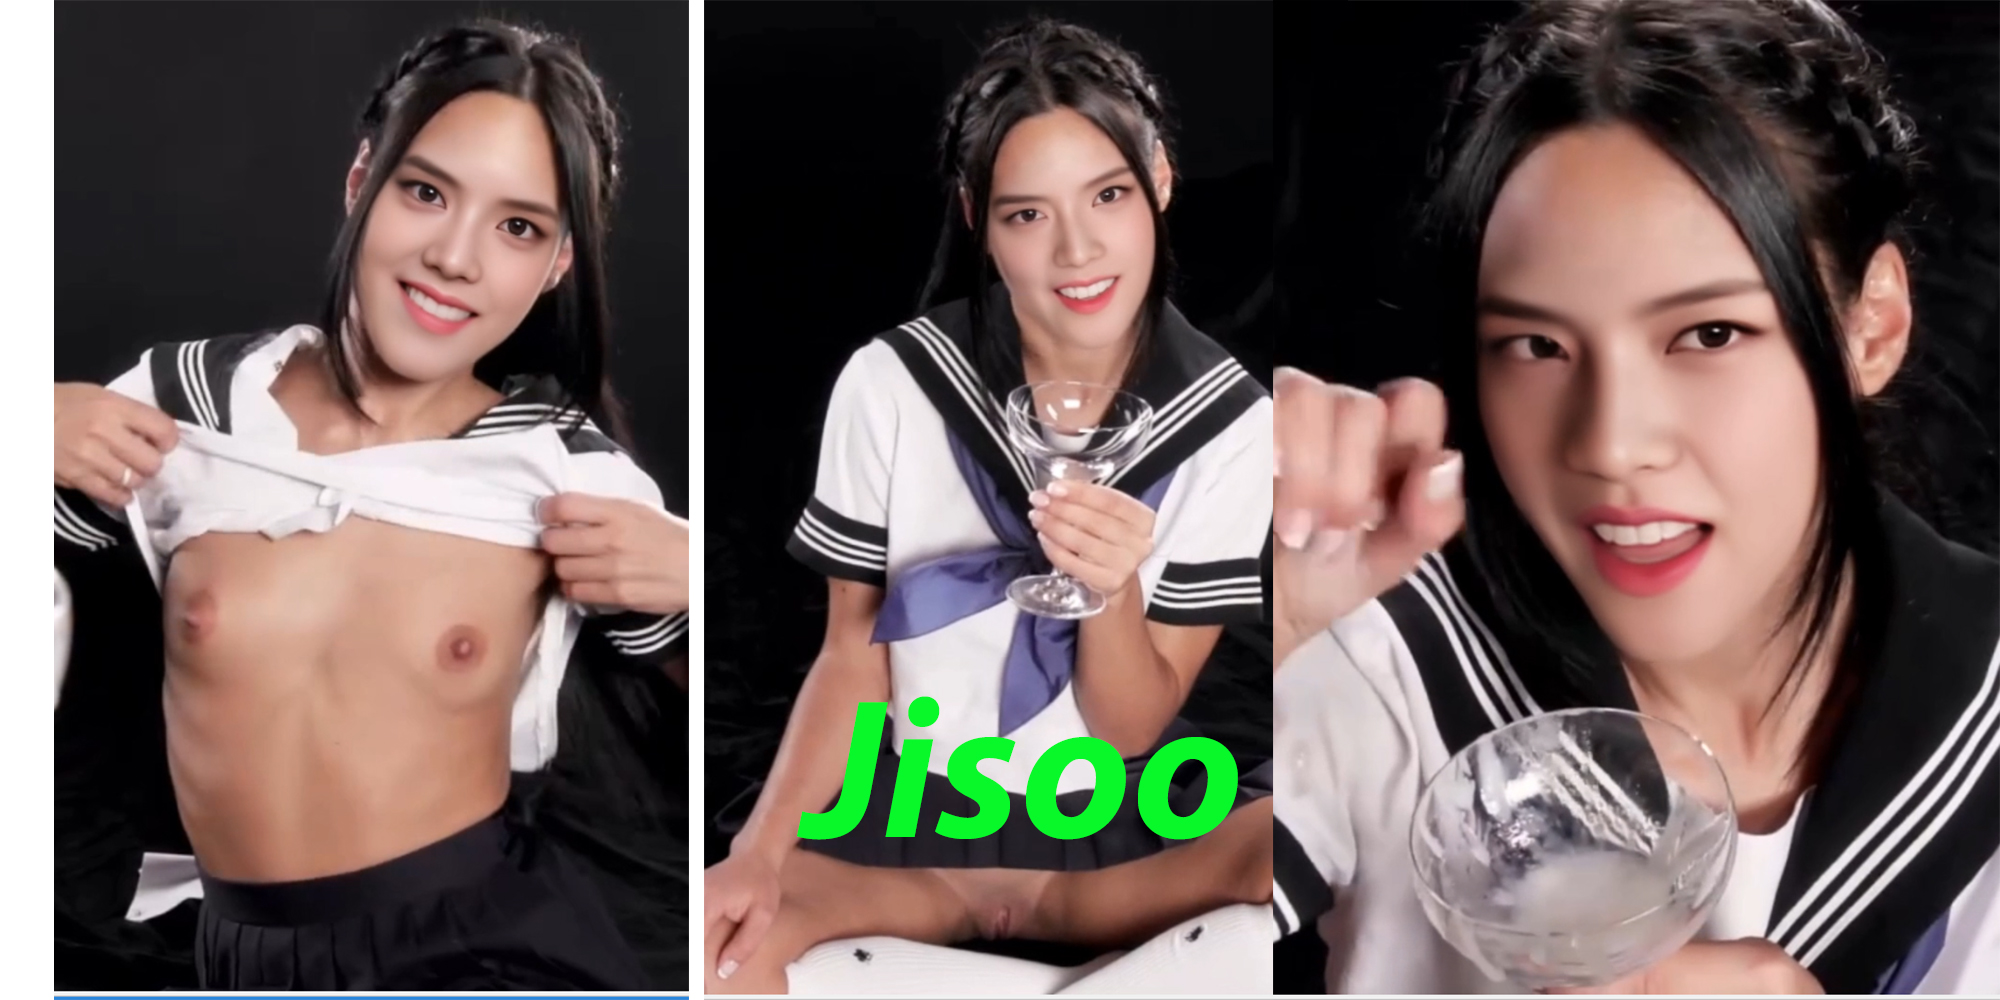 Jisoo meets and greets her fans